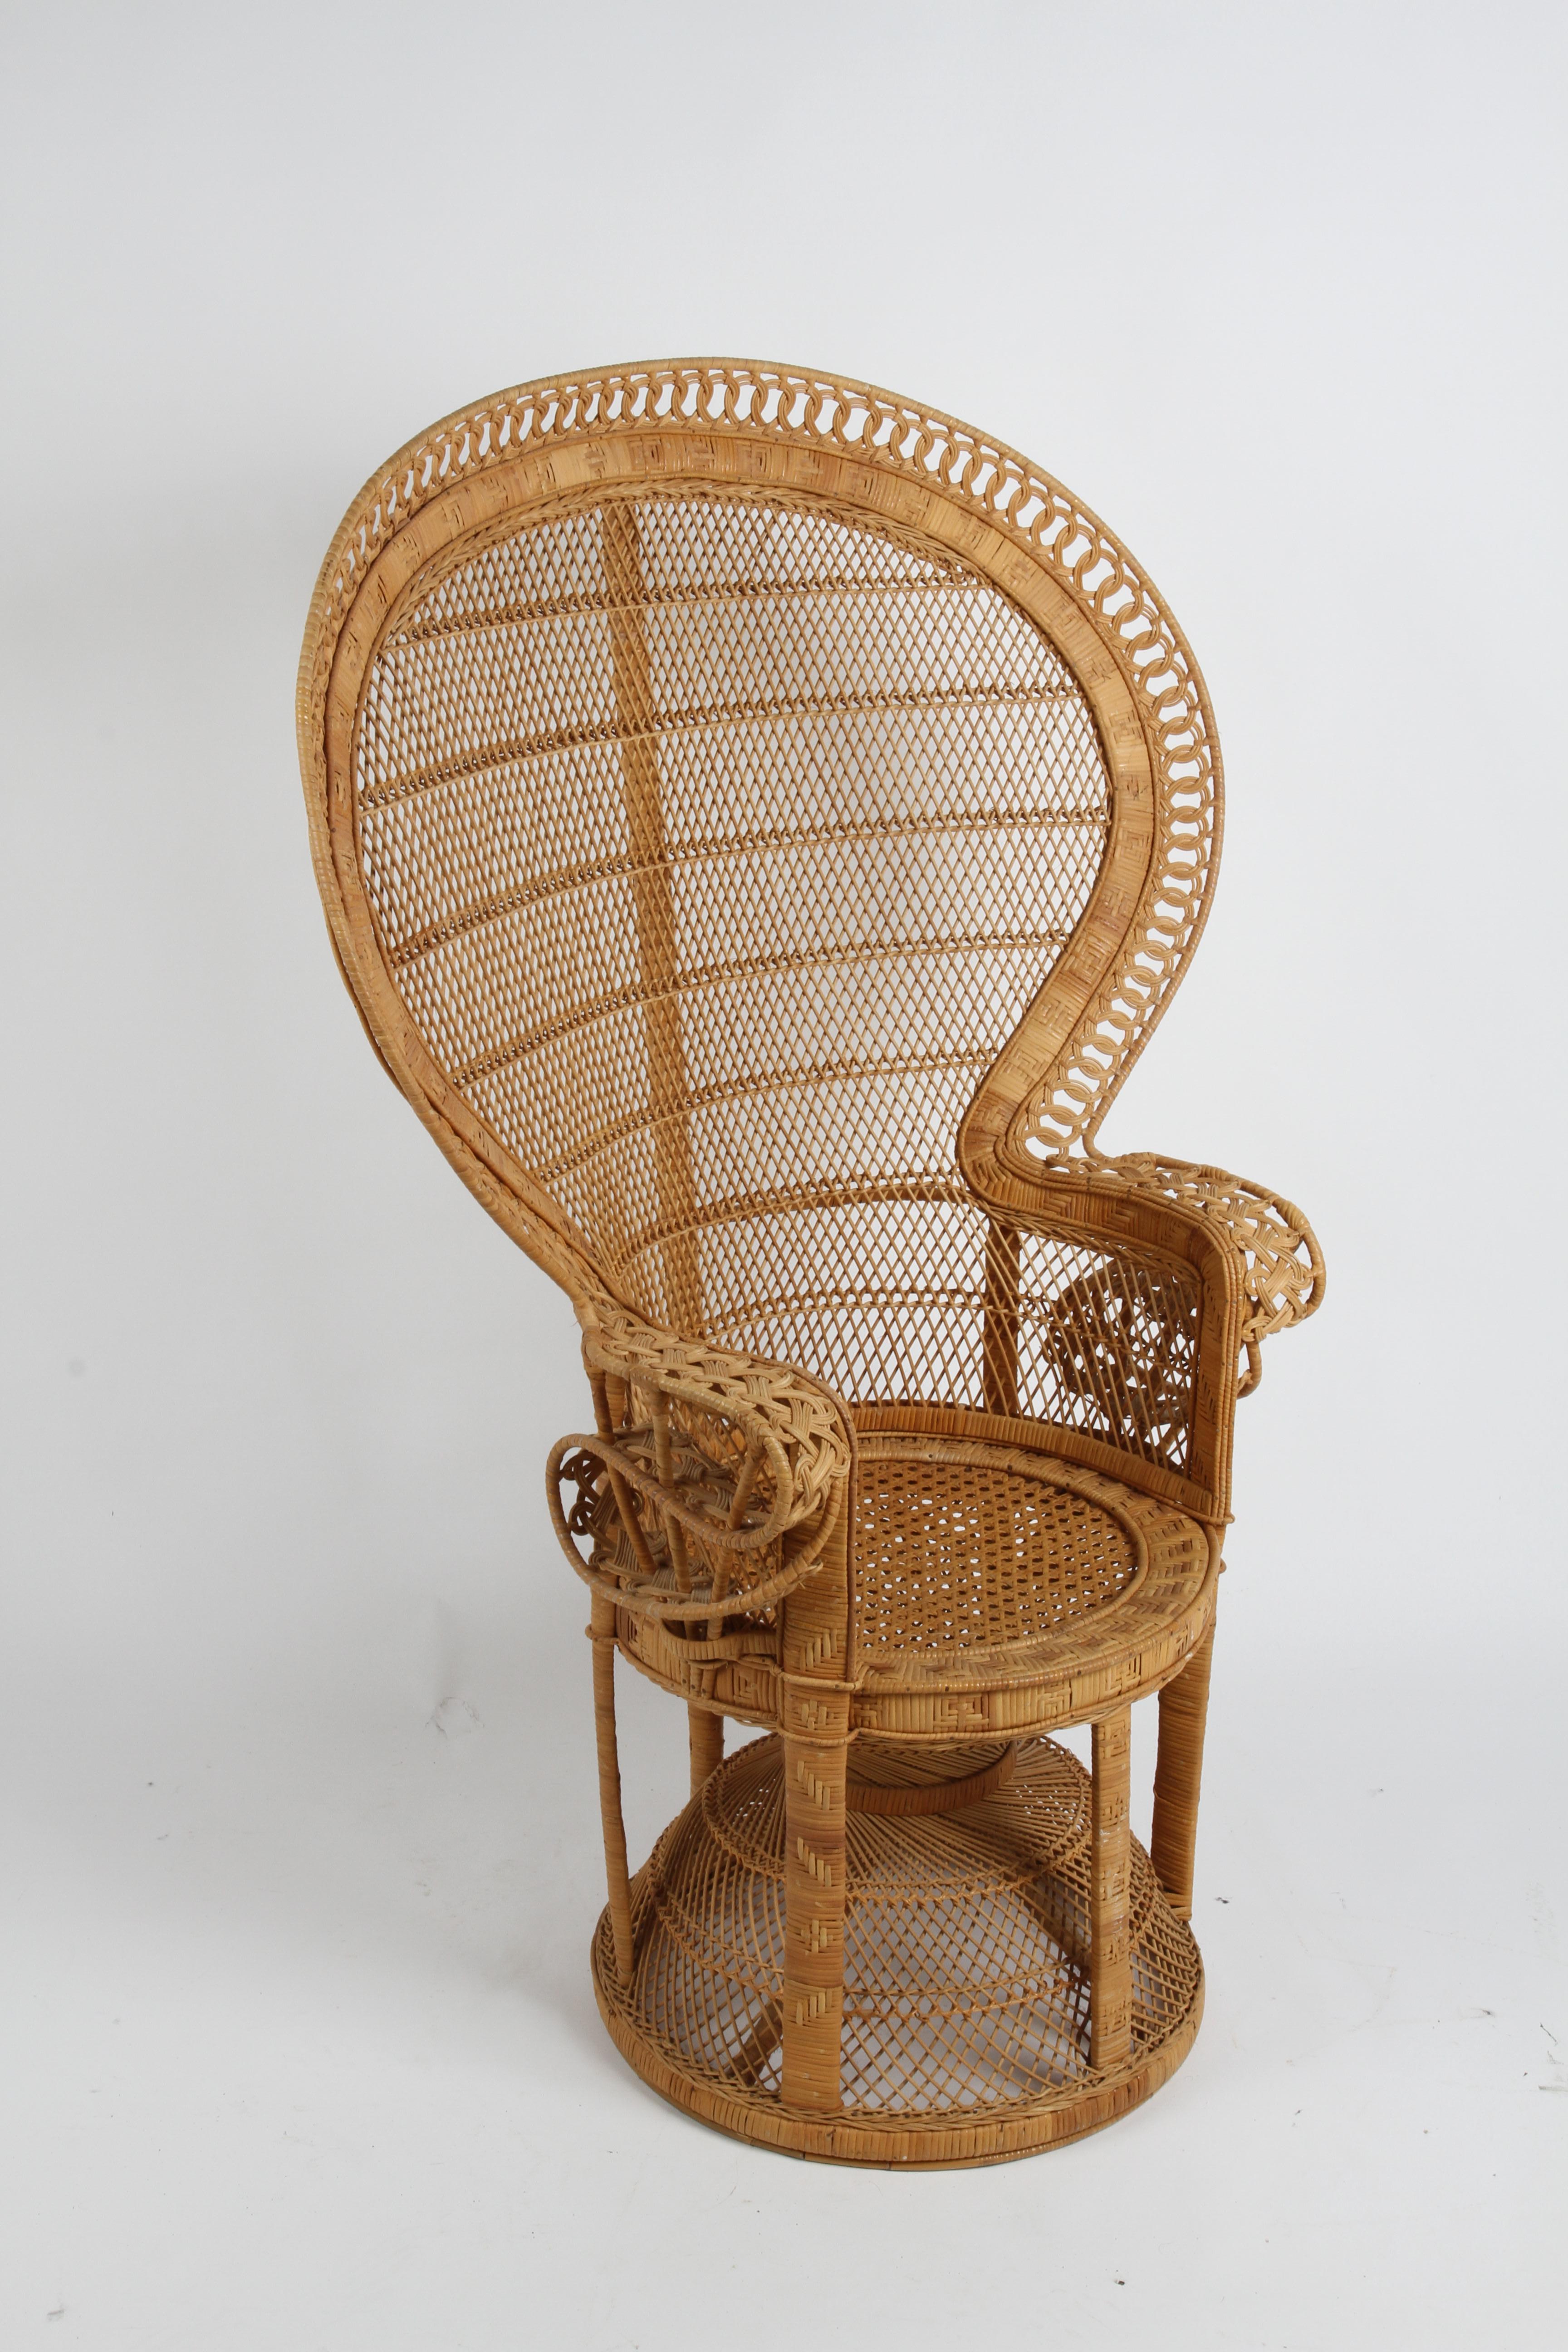 Vintage 1970s Rattan & Wicker Handcrafted Boho Chic Emmanuelle Peacock Chair 2